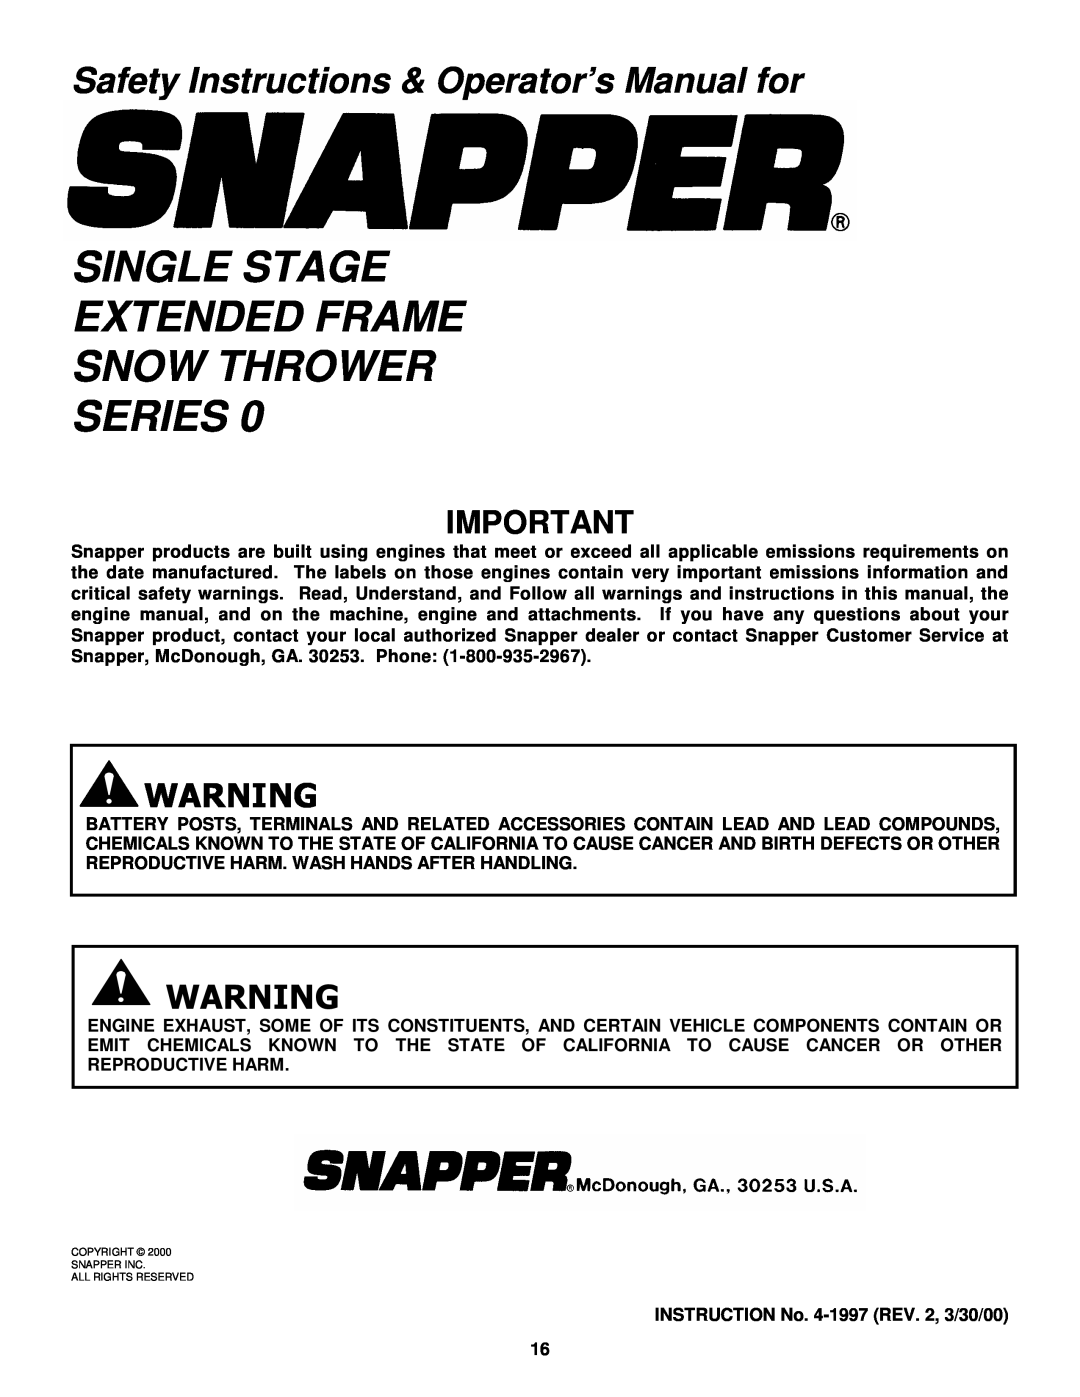 Snapper SX5200R, SX5200E Single Stage Extended Frame Snow Thrower Series, Safety Instructions & Operator’s Manual for 